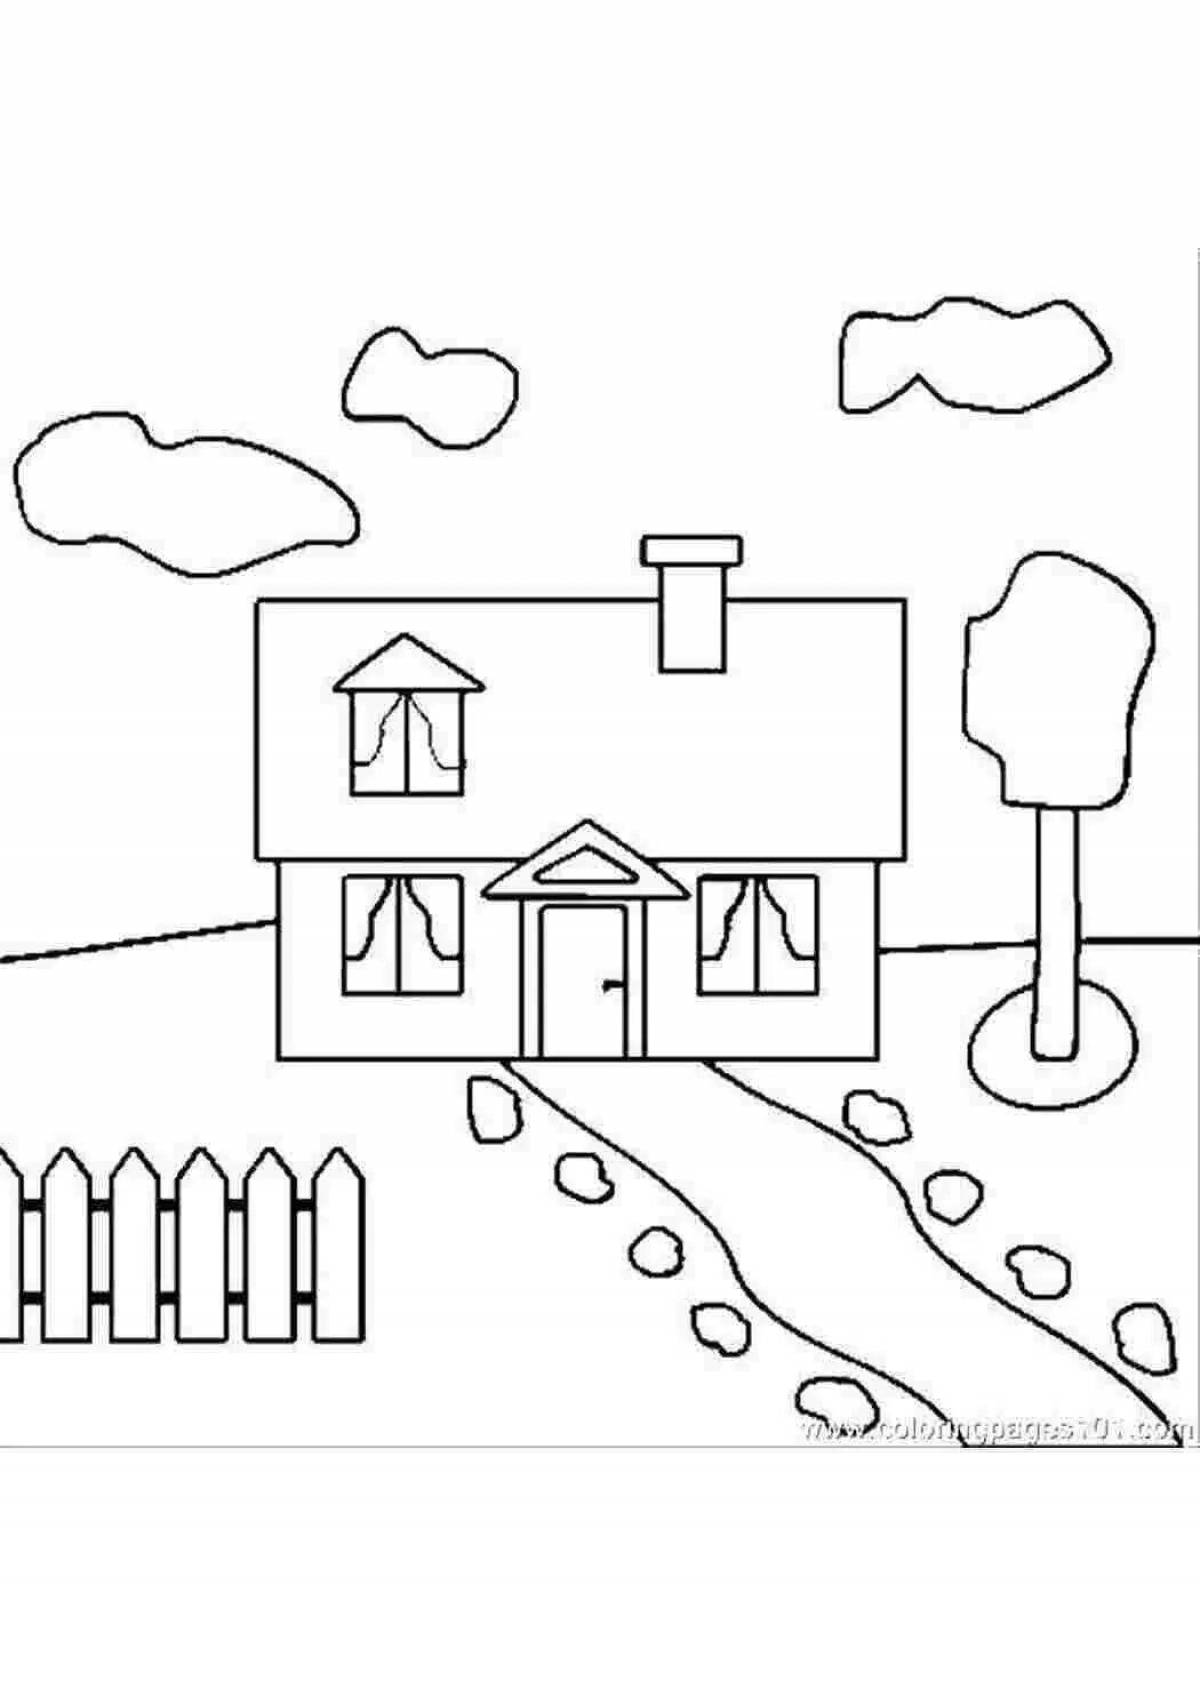 Great street coloring book for kids